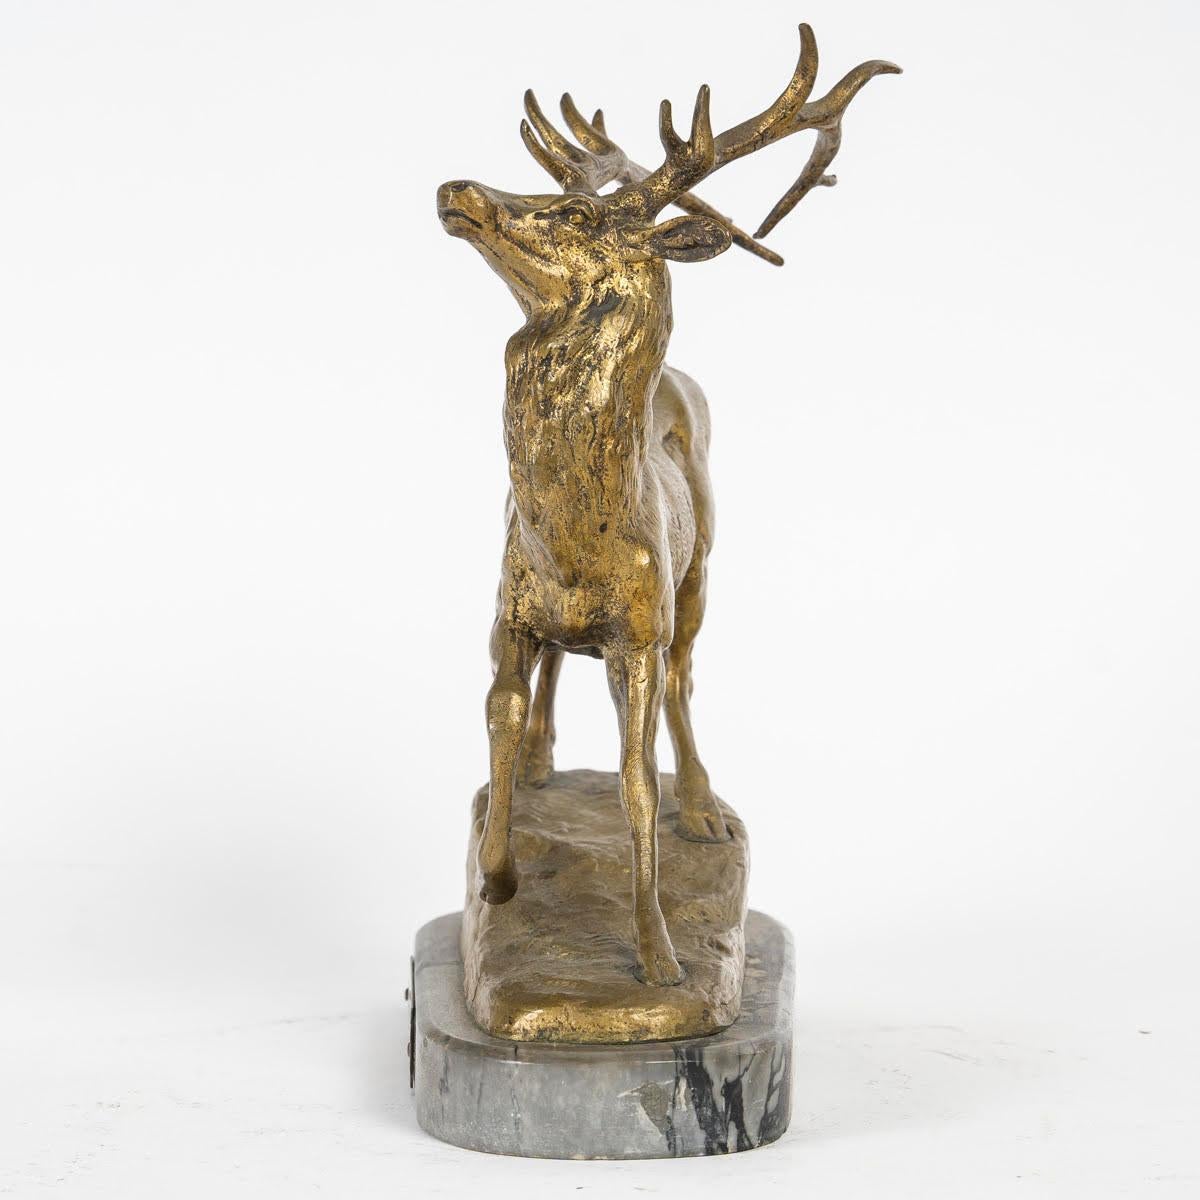 19th Century Sculpture of a Stag in Freedom by Aignon, Sculptor, Napoleon III Period. For Sale